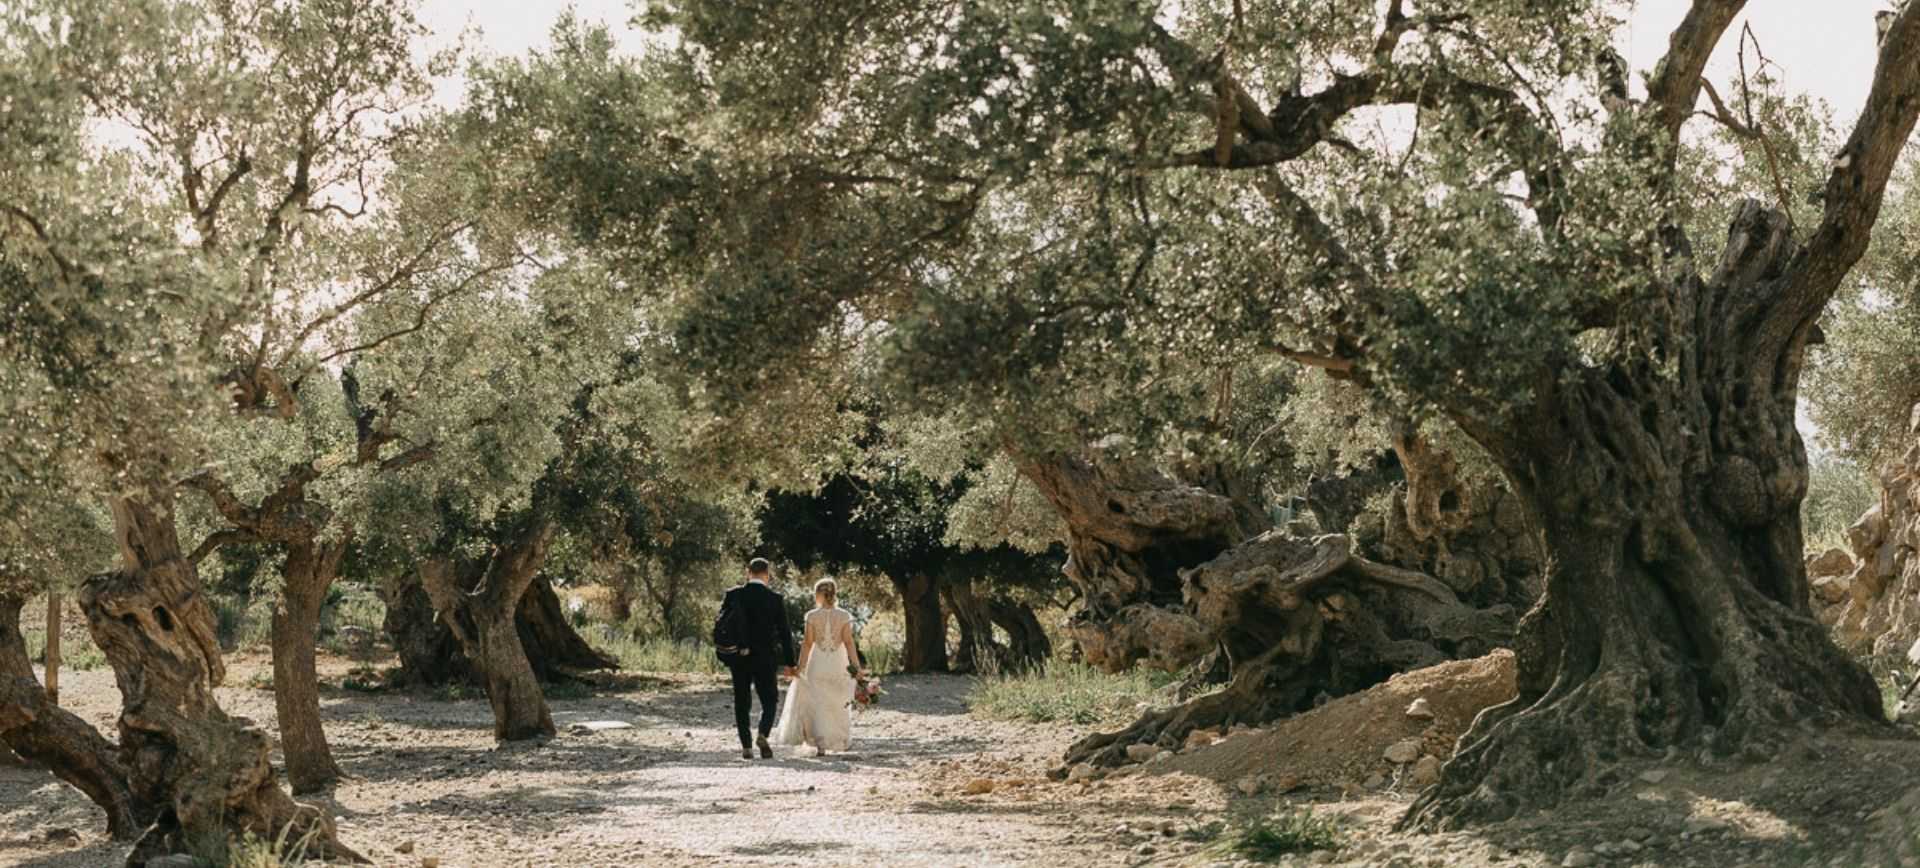 Mallorca wedding package - eloping couple in old olive garden